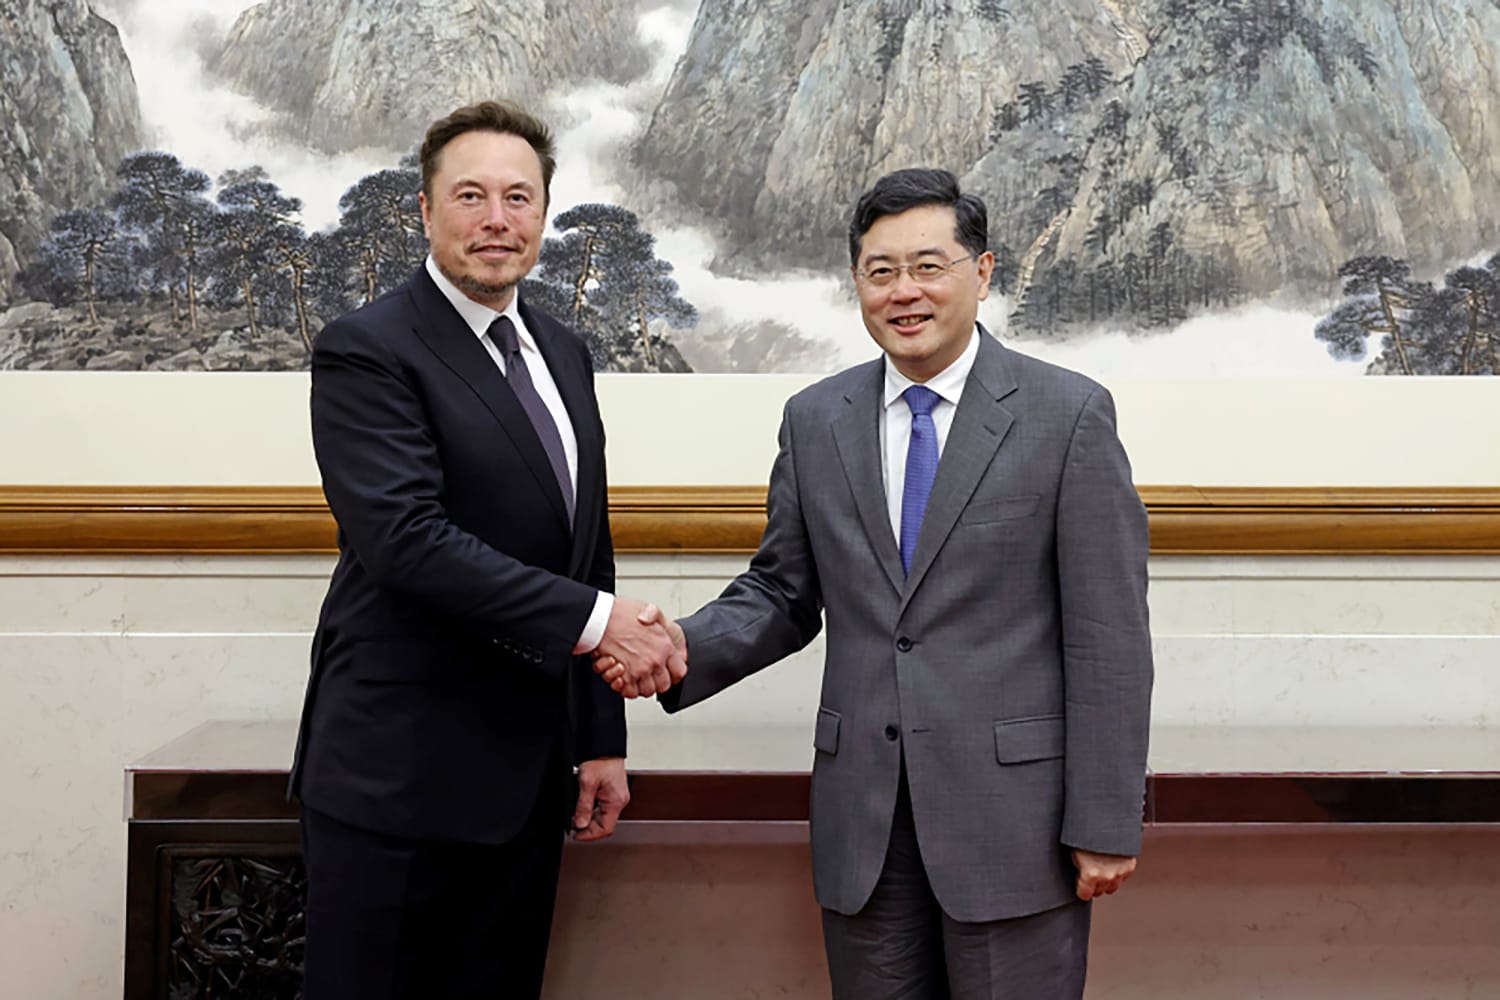 Elon Musk leaves China after whirlwind trip filled with praise and politics